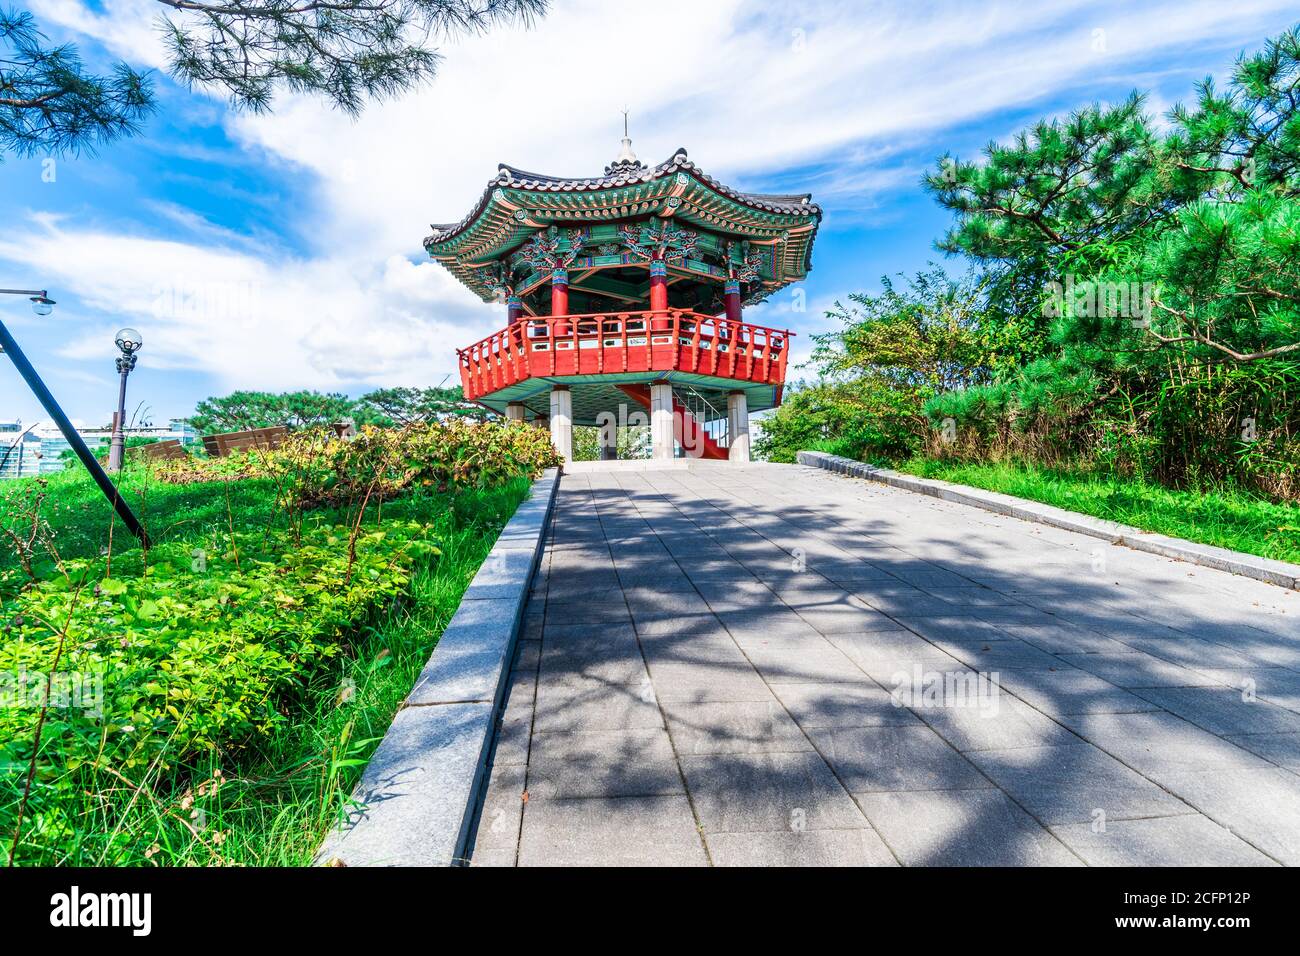 Traditional Korean pavilion from Ilsan Lake Park in the Ilsan district of Goyang, South Korea. Stock Photo